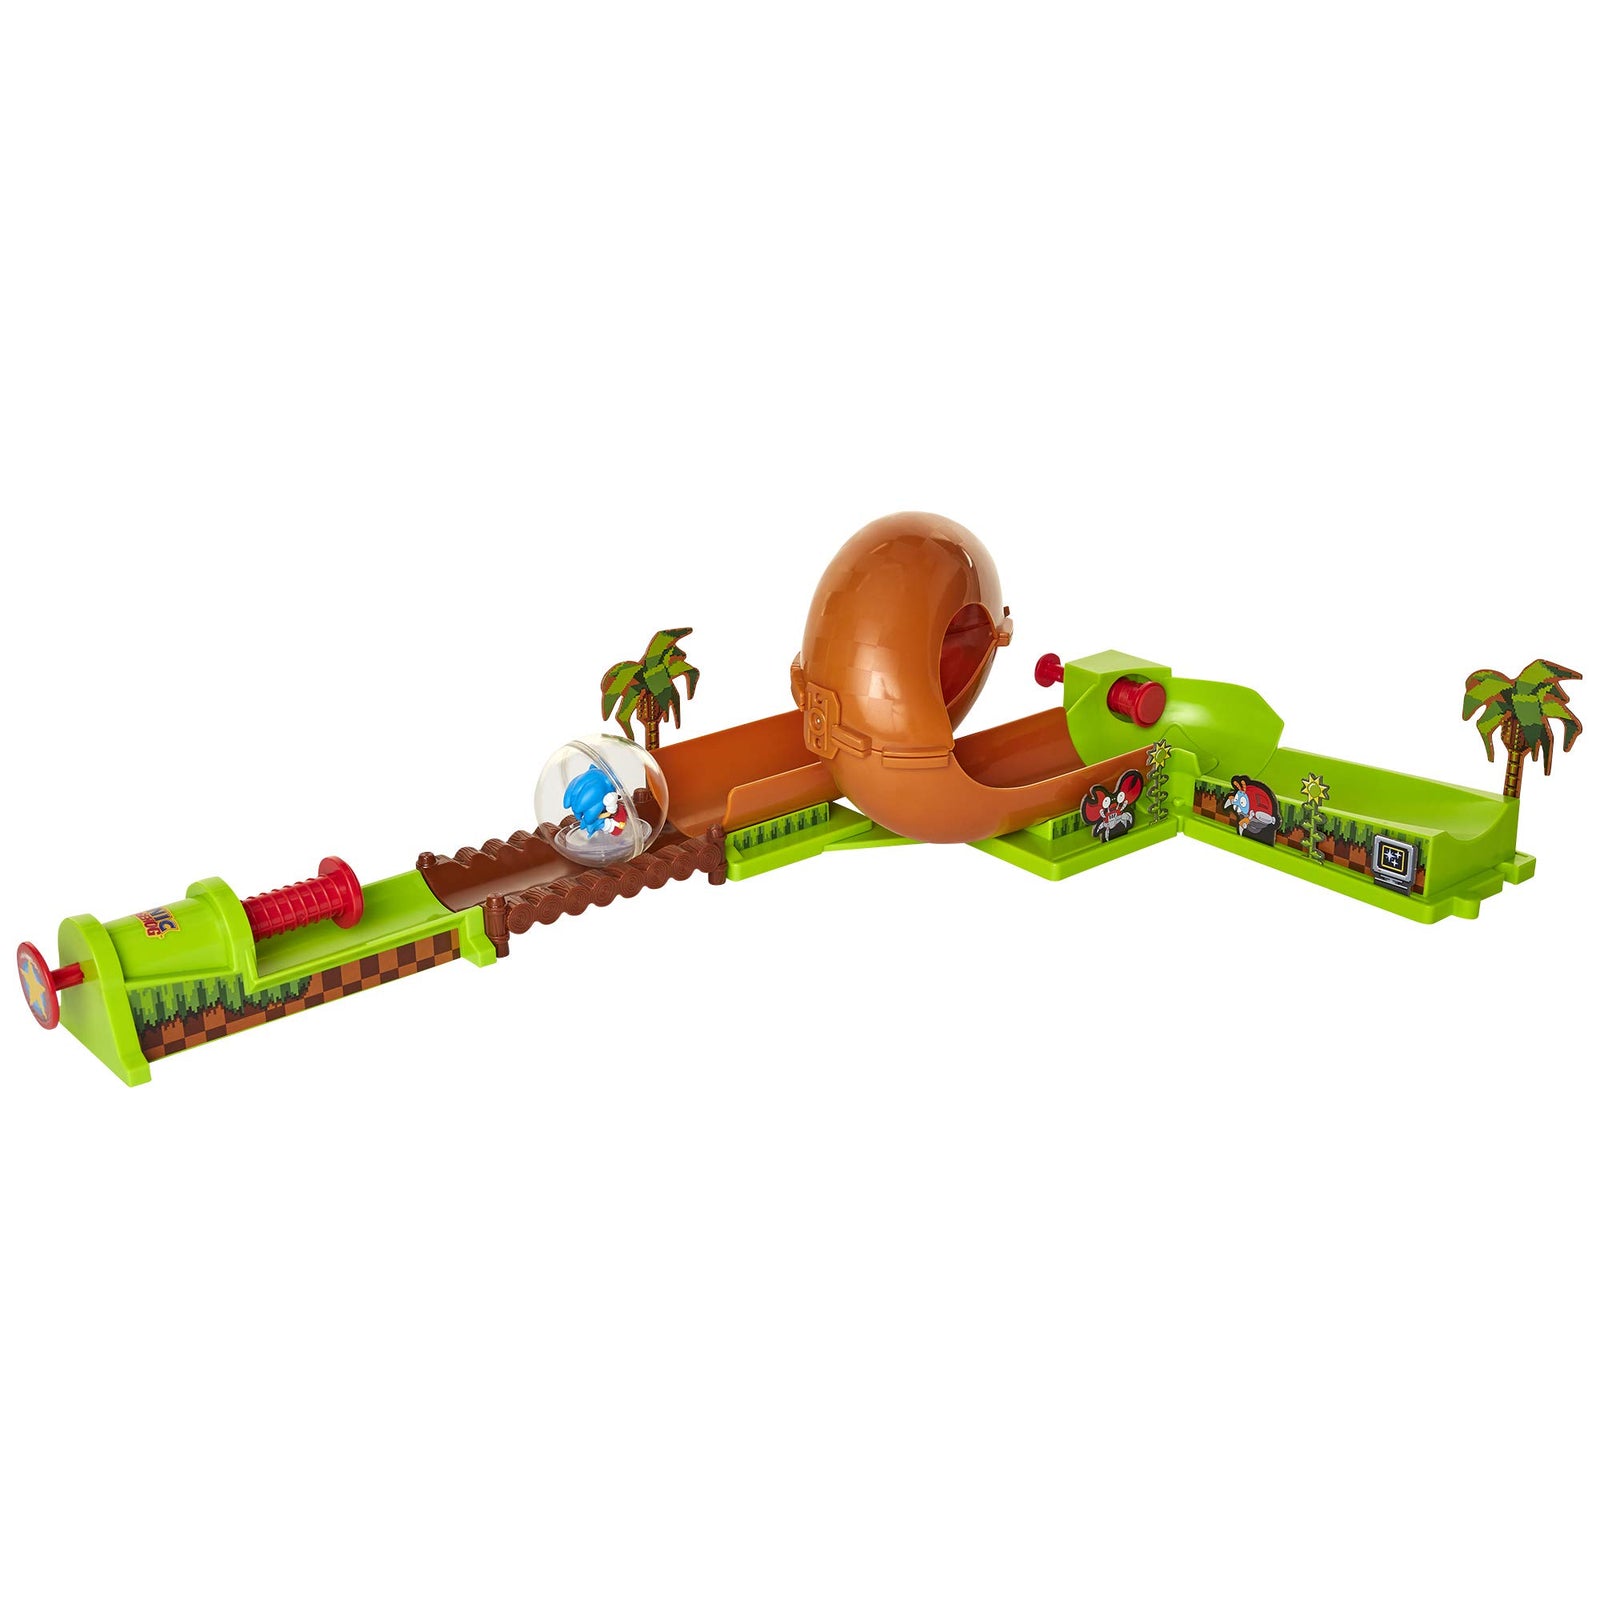 Sonic The Hedgehog Pinball Green Hill Zone Pinball Track Play Set, 9 Piece, with Looping Action & Automatic Bumper Exclusive Sonic Sphere Included, for Ages 3+